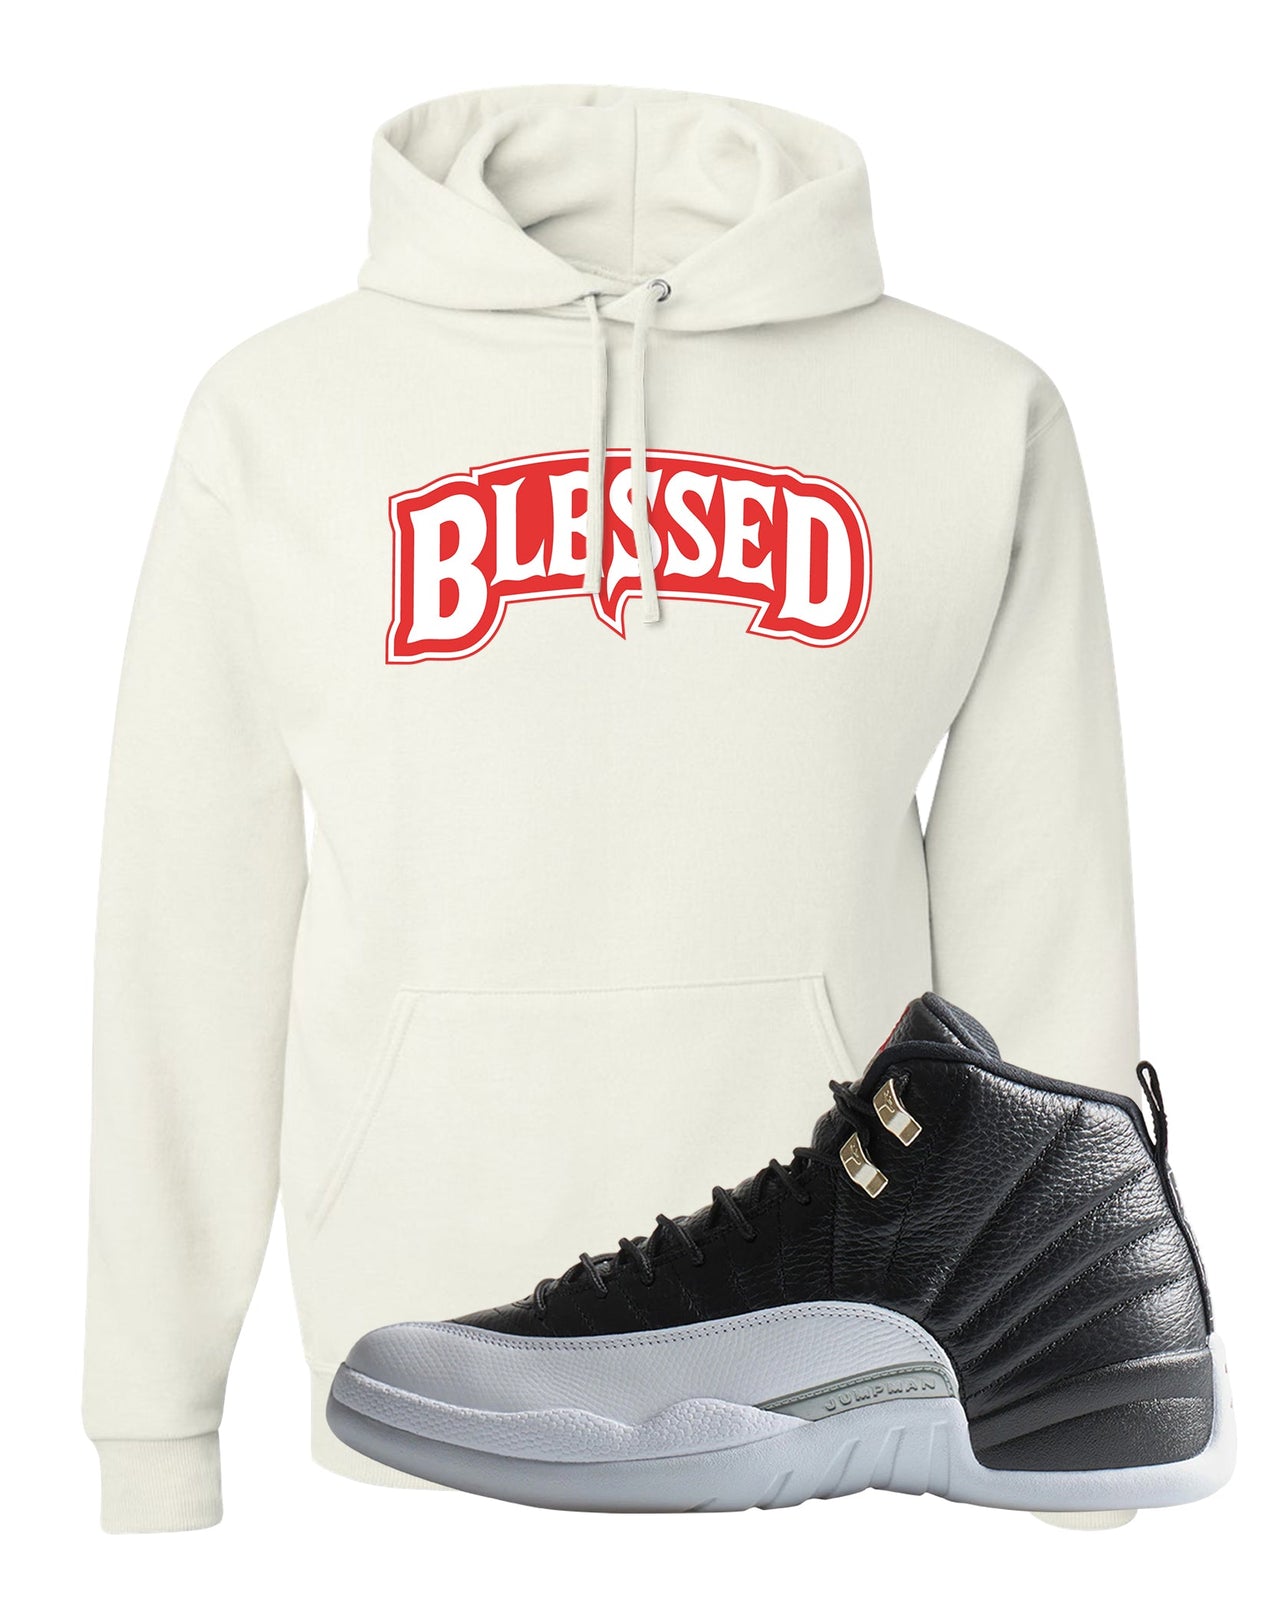 Playoff 12s Hoodie | Blessed Arch, White